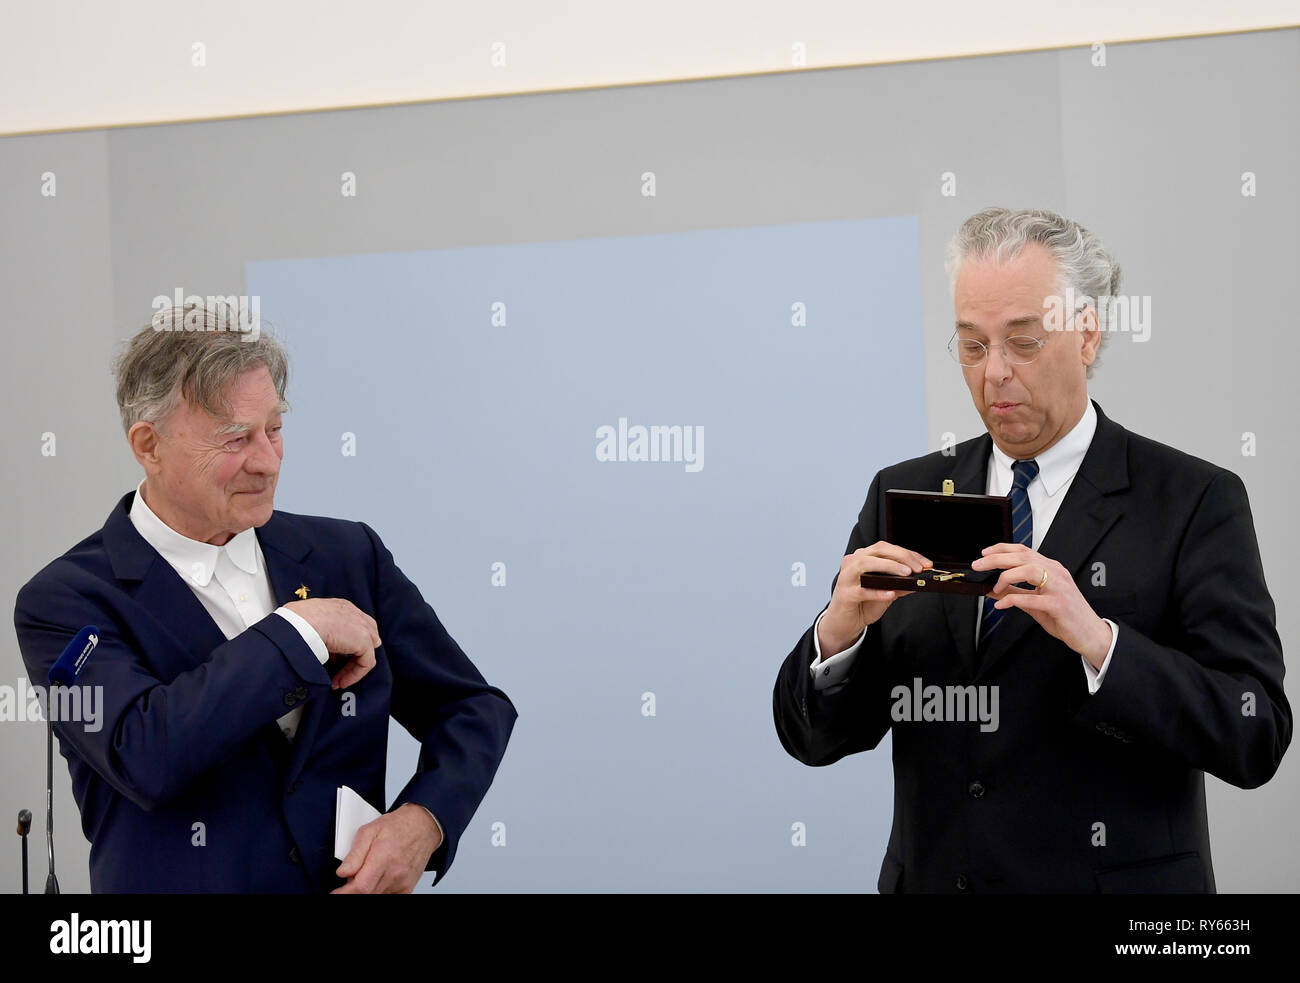 Berlin, Germany. 12th Mar, 2019. Heiner Bastian (l), art collector, presented Michael Eissenhauer, Director General of the Staatliche Museen zu Berlin, with the key to Haus Bastian as a centre for cultural education at the Stiftung Preußischer Kulturbesitz. The building, designed by architect Chipperfield, has been used by the Bastian family as a gallery house since 2007 and was donated to the foundation in 2017. Credit: Britta Pedersen/dpa-Zentralbild/dpa/Alamy Live News Stock Photo